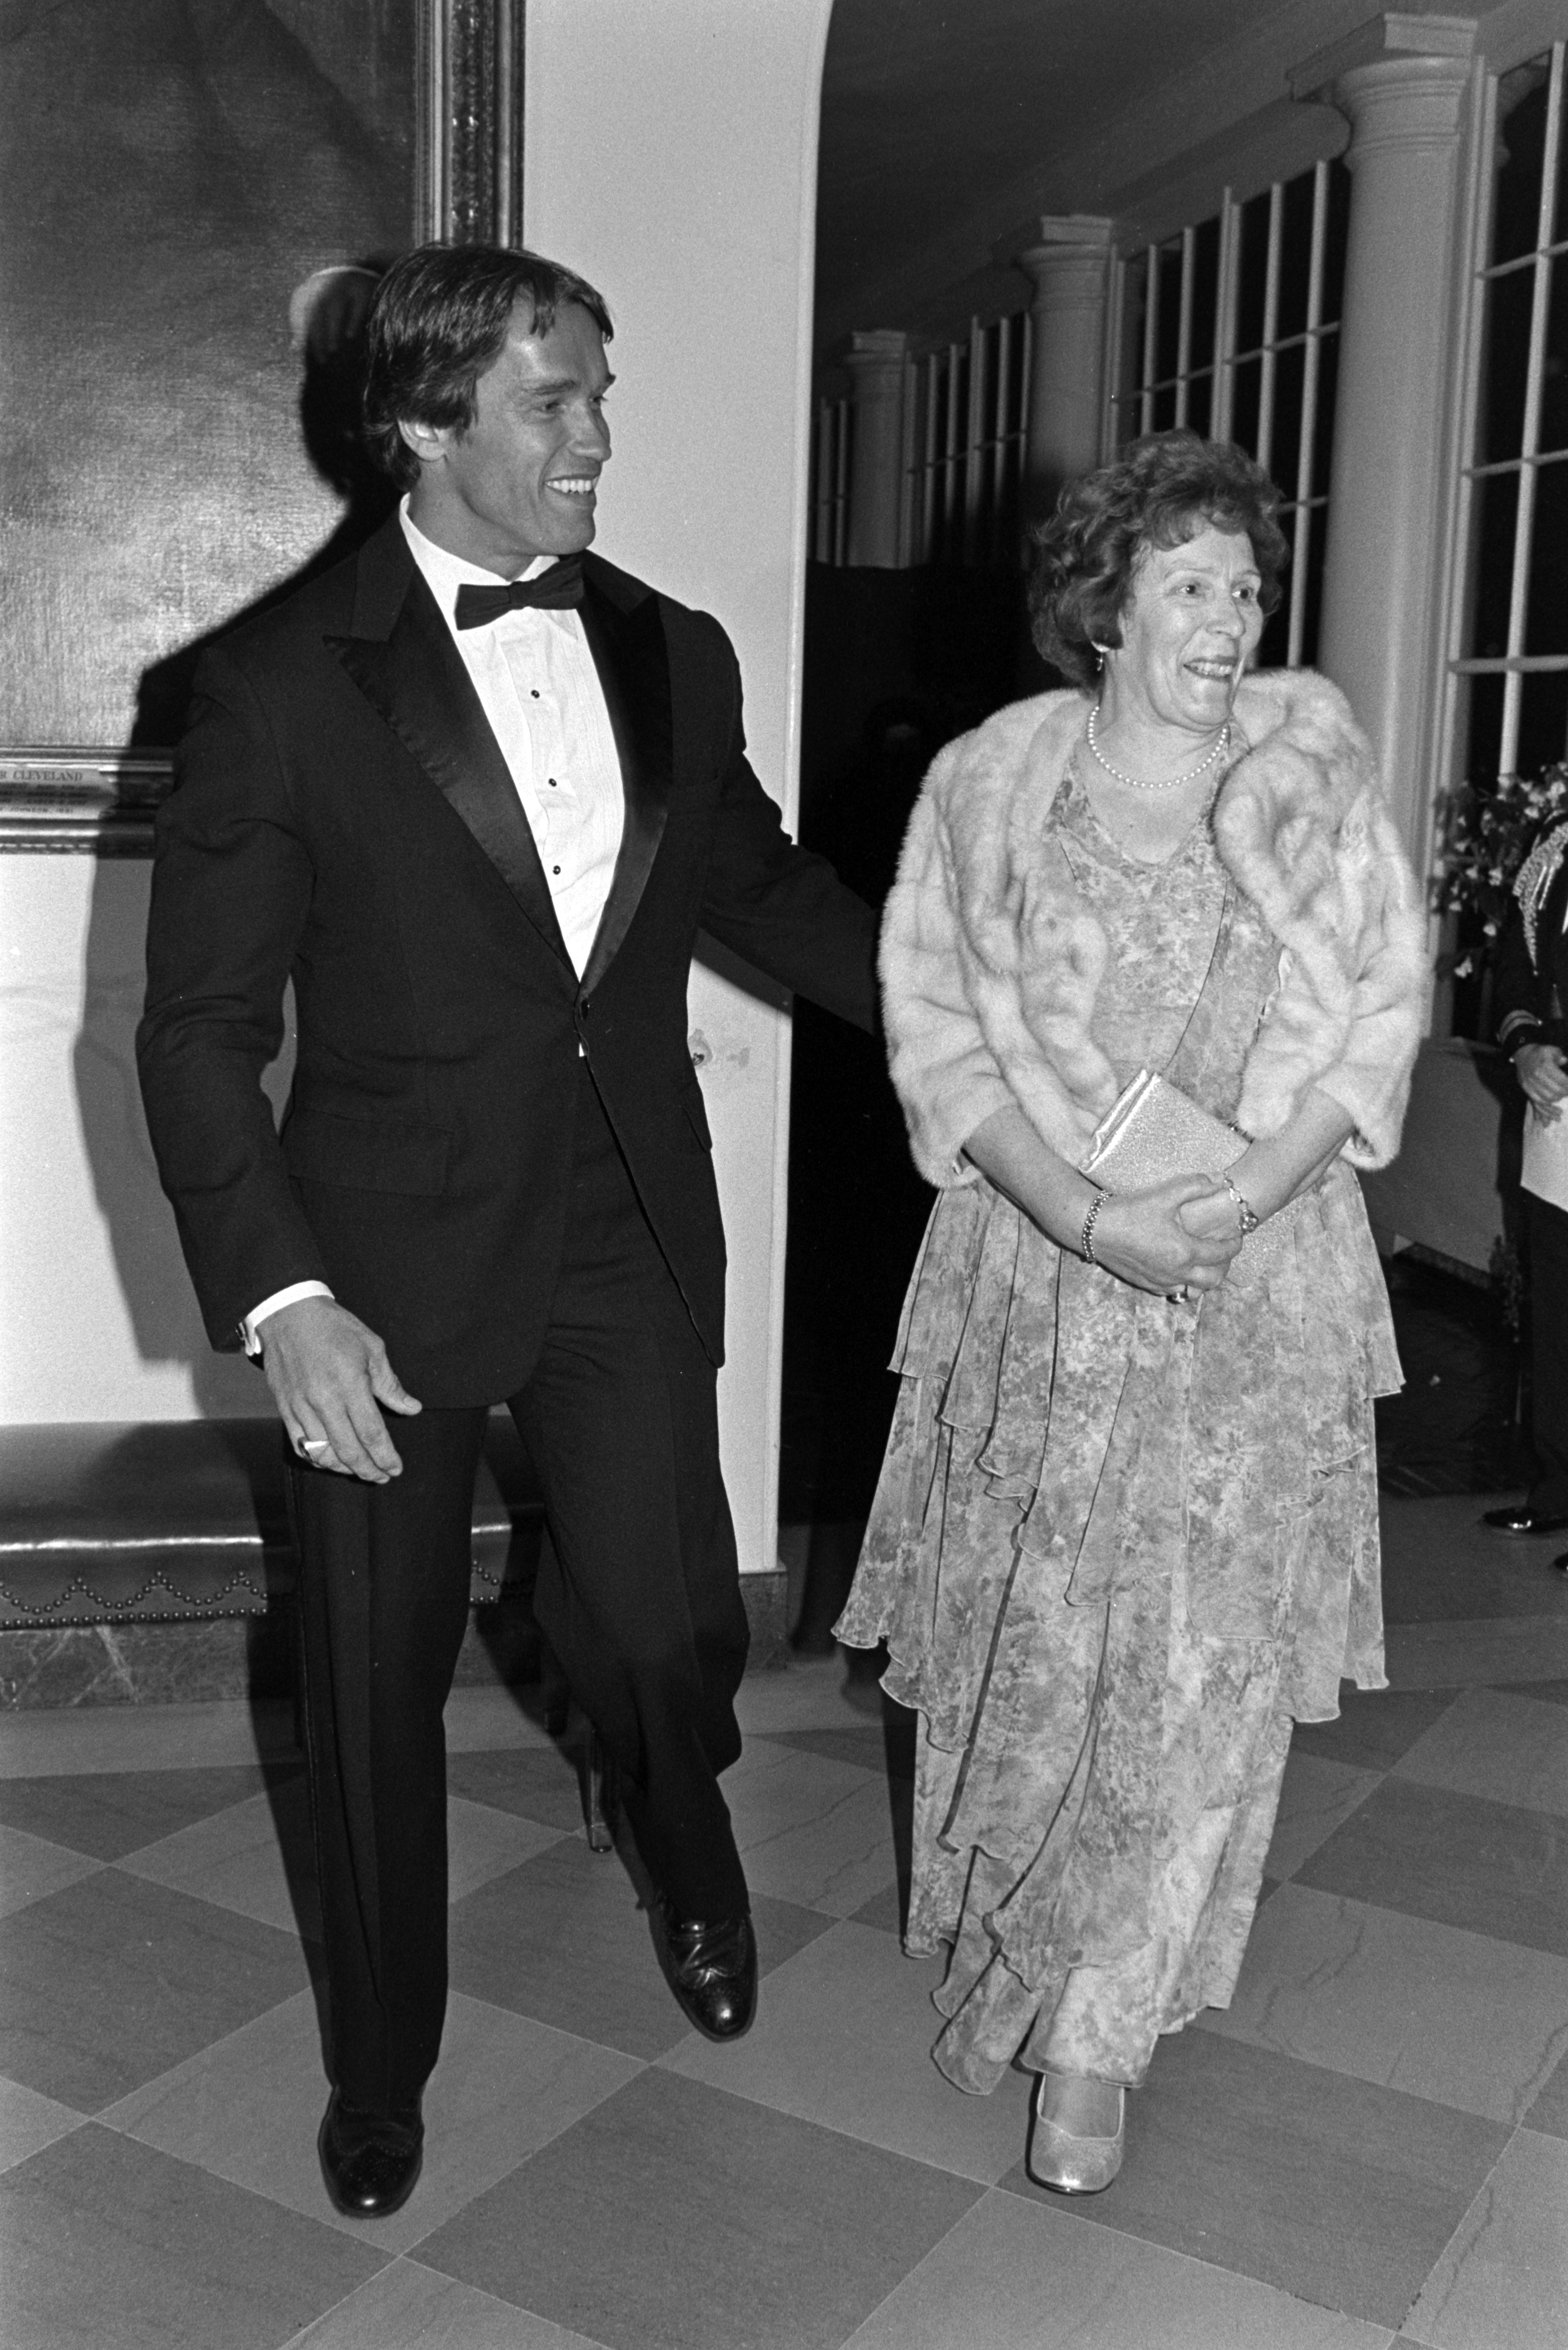 Arnold Schwarzenegger and his mother, Aurelia Schwarzenegger, at an event at the White House in Washington, D.C., on March 19, 1985 | Source: Getty Images